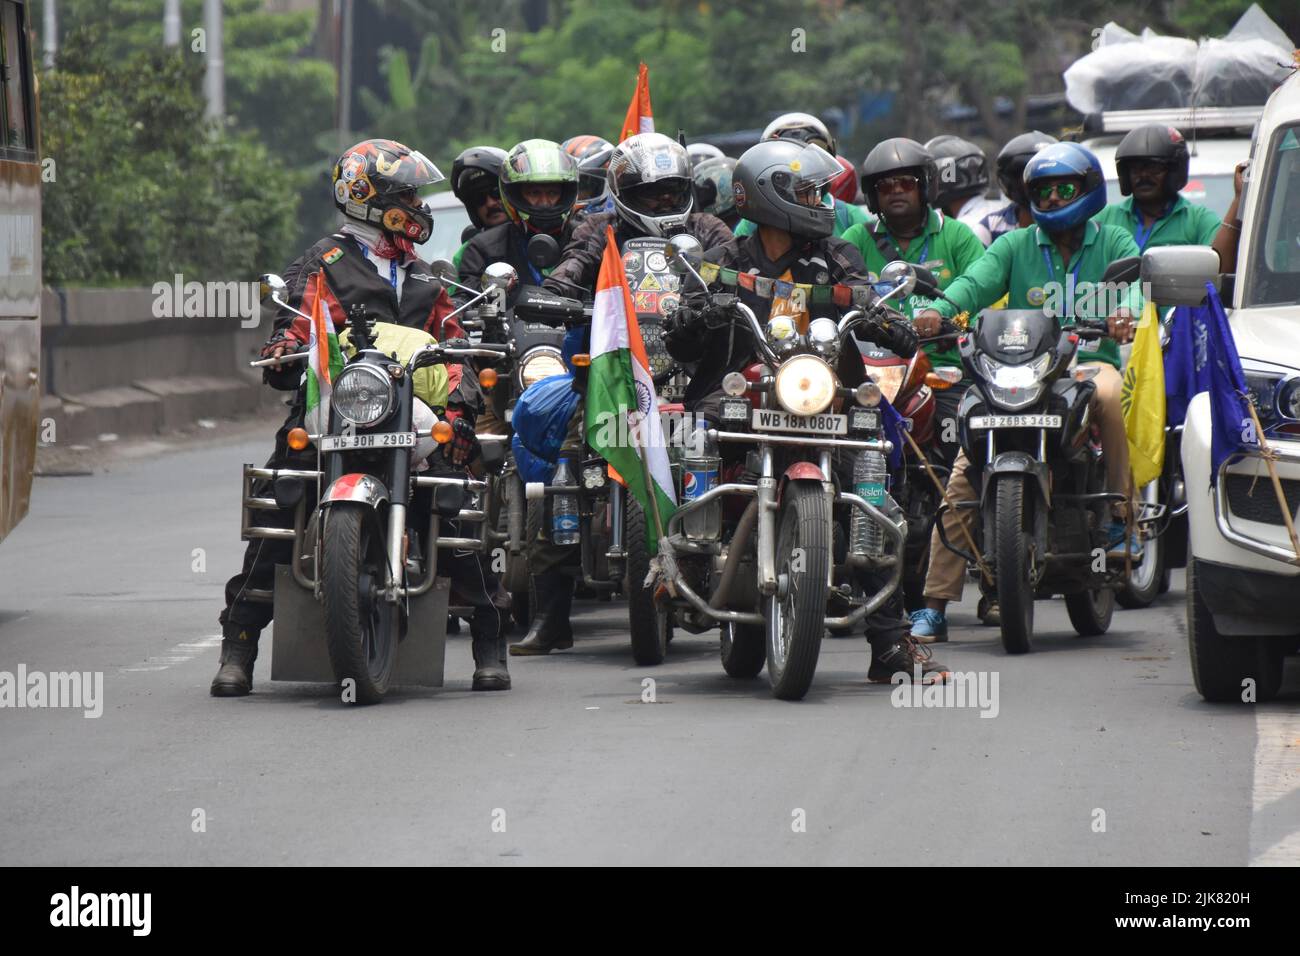 Bikers running on the Kona Expressway (NH 117) in Howrah at the event of 'Sagar Theke Pahare' - An Indo-Bangladesh bike & car rally and mountaineering expedition from Gangasagar to Mt. Yunam (20,000ft) at Lahaul and Spiti, Himachal Pradesh via Kolkata, Bandel, Dhanbad, Varanasi, Agra, Delhi, Bilaspur, Manali, Gispa and Bharatpur by road covering more than 2500 kms, with holy water of Bay of Bengal and flag of India, to reach at the peak on 15th August, 2022 on the occasion of the 75th Independence Day of India.An another team of Bangladesh is expected to join from Delhi with the holy water of Stock Photo